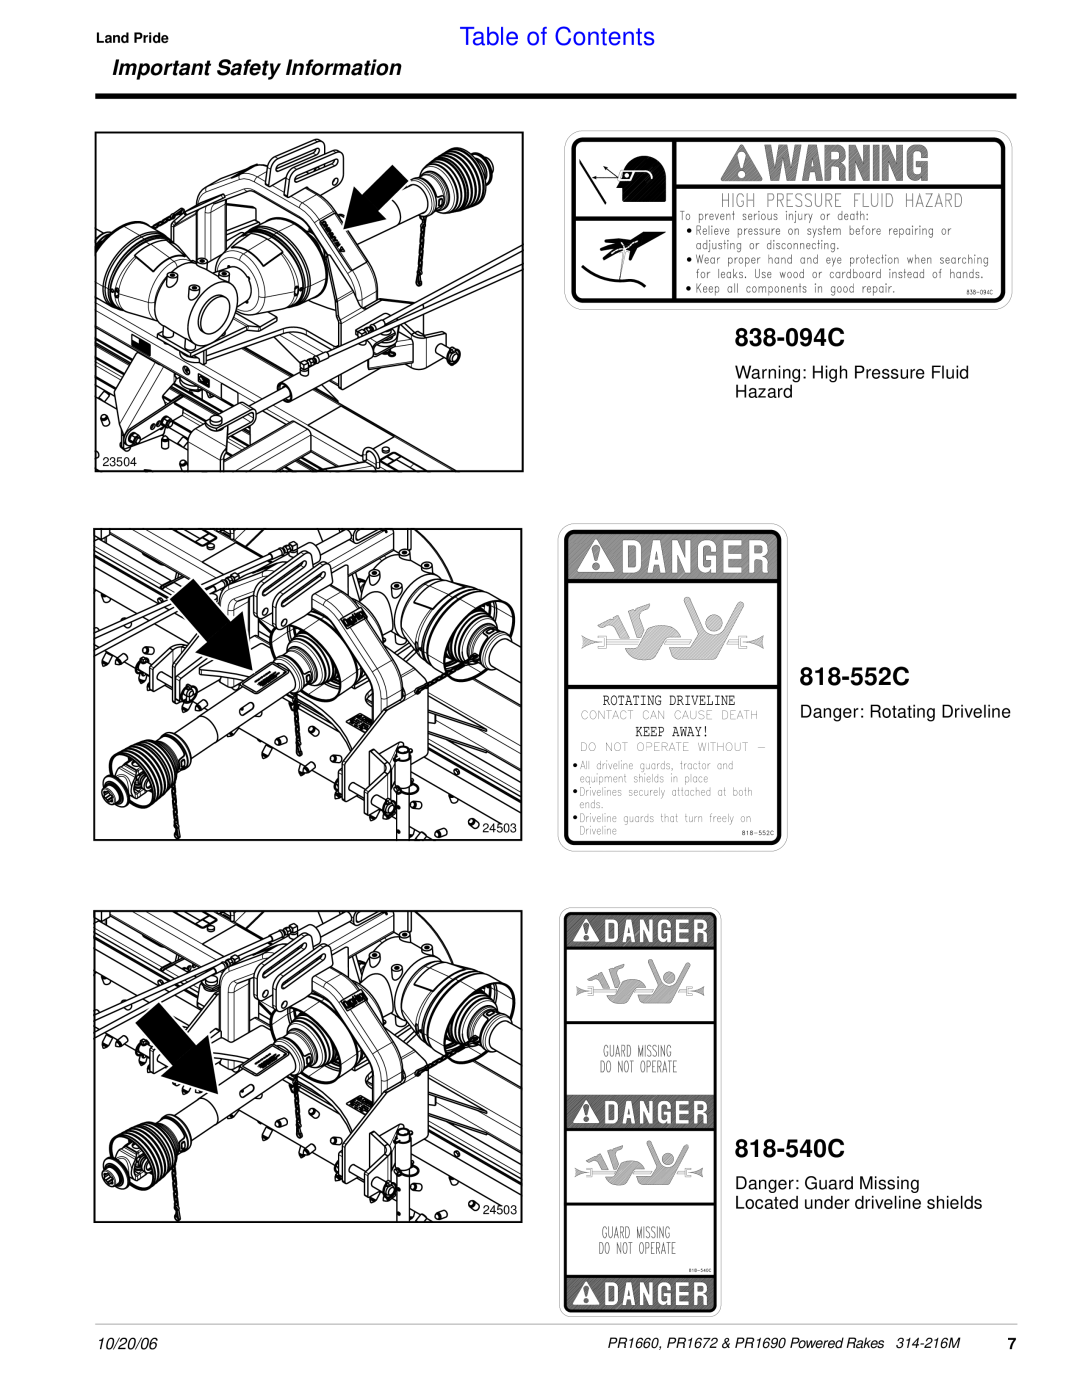 Land Pride PR1672 838-094C, 818-540C, Table of Contents, 818-552C, Important Safety Information, Rotating Driveline, 23504 